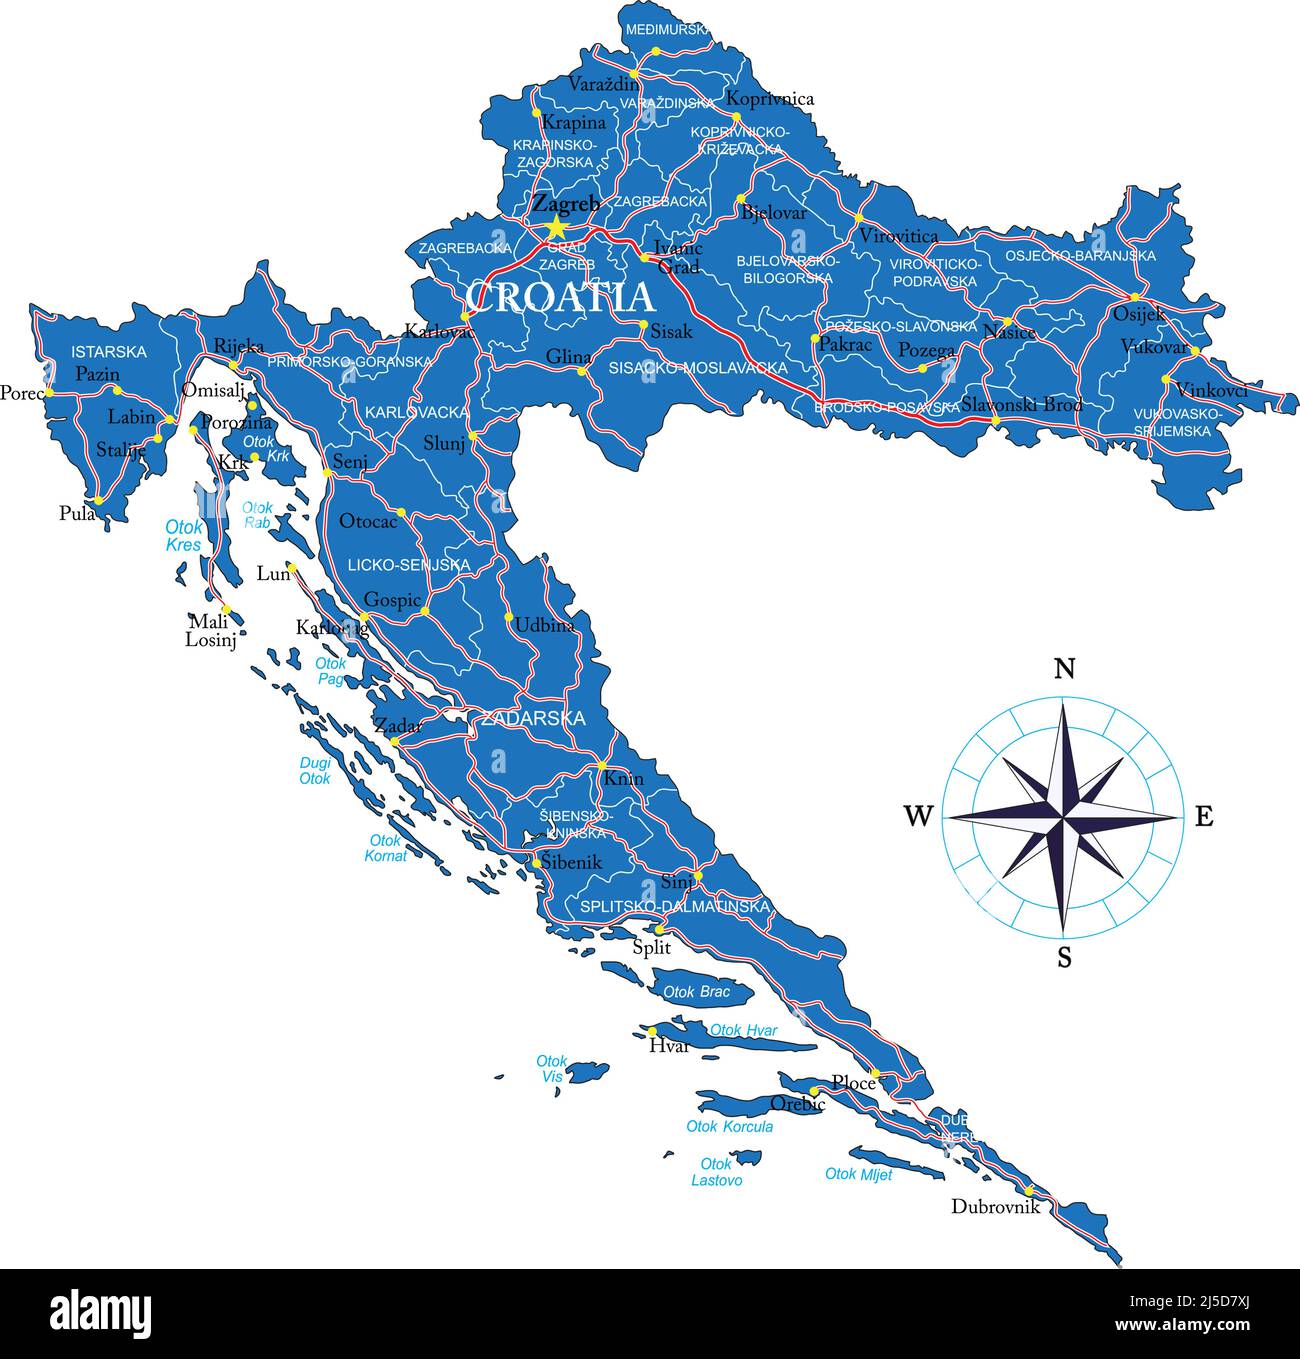 Highly detailed vector map of Croatia with administrative regions, main cities and roads. Stock Vector